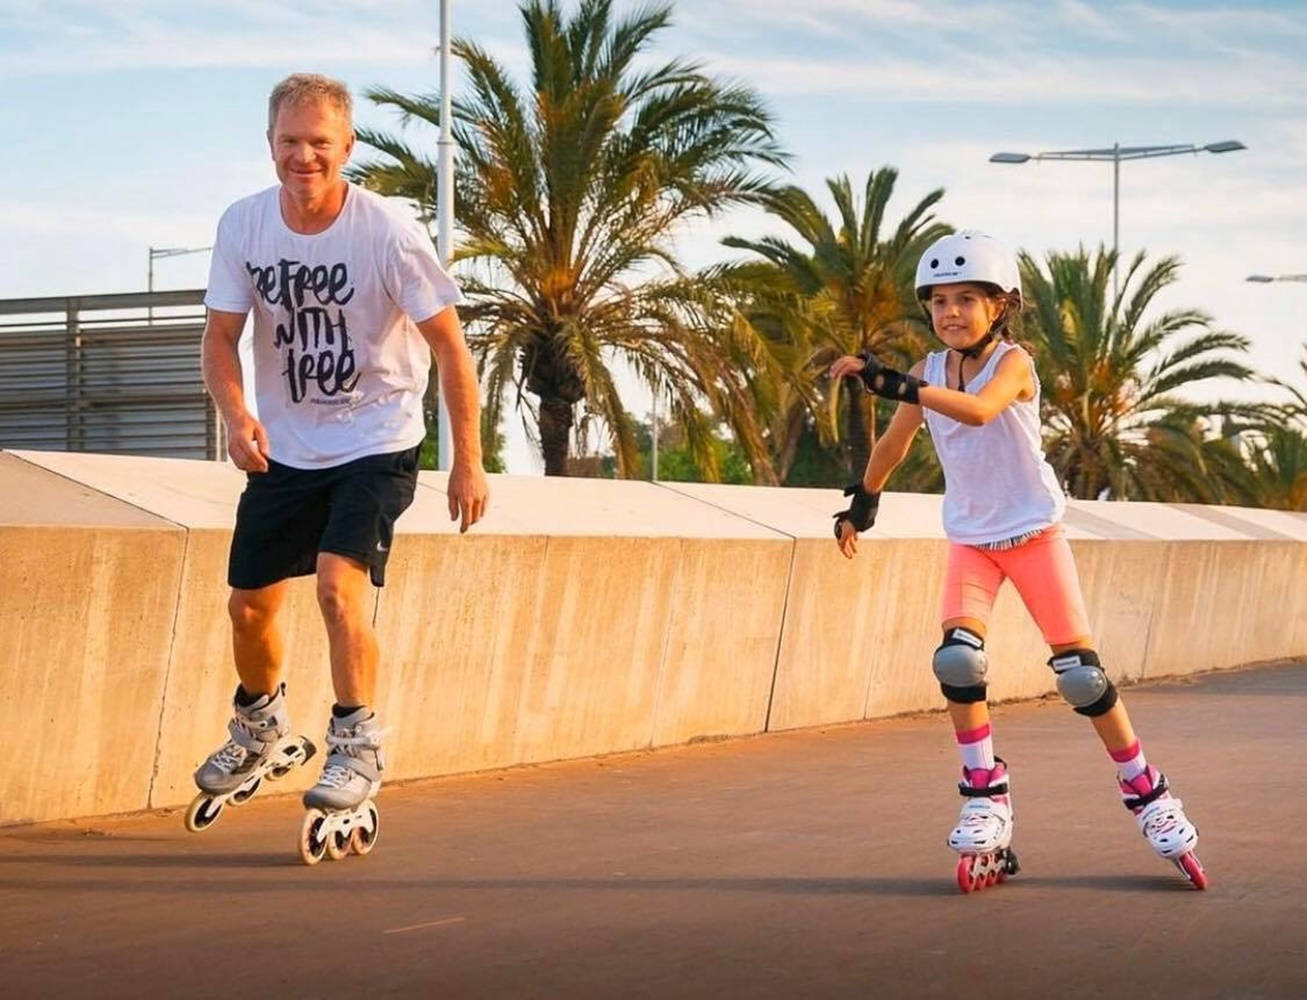 Father and Daughter Enjoying Rollerblading in Park Wallpaper